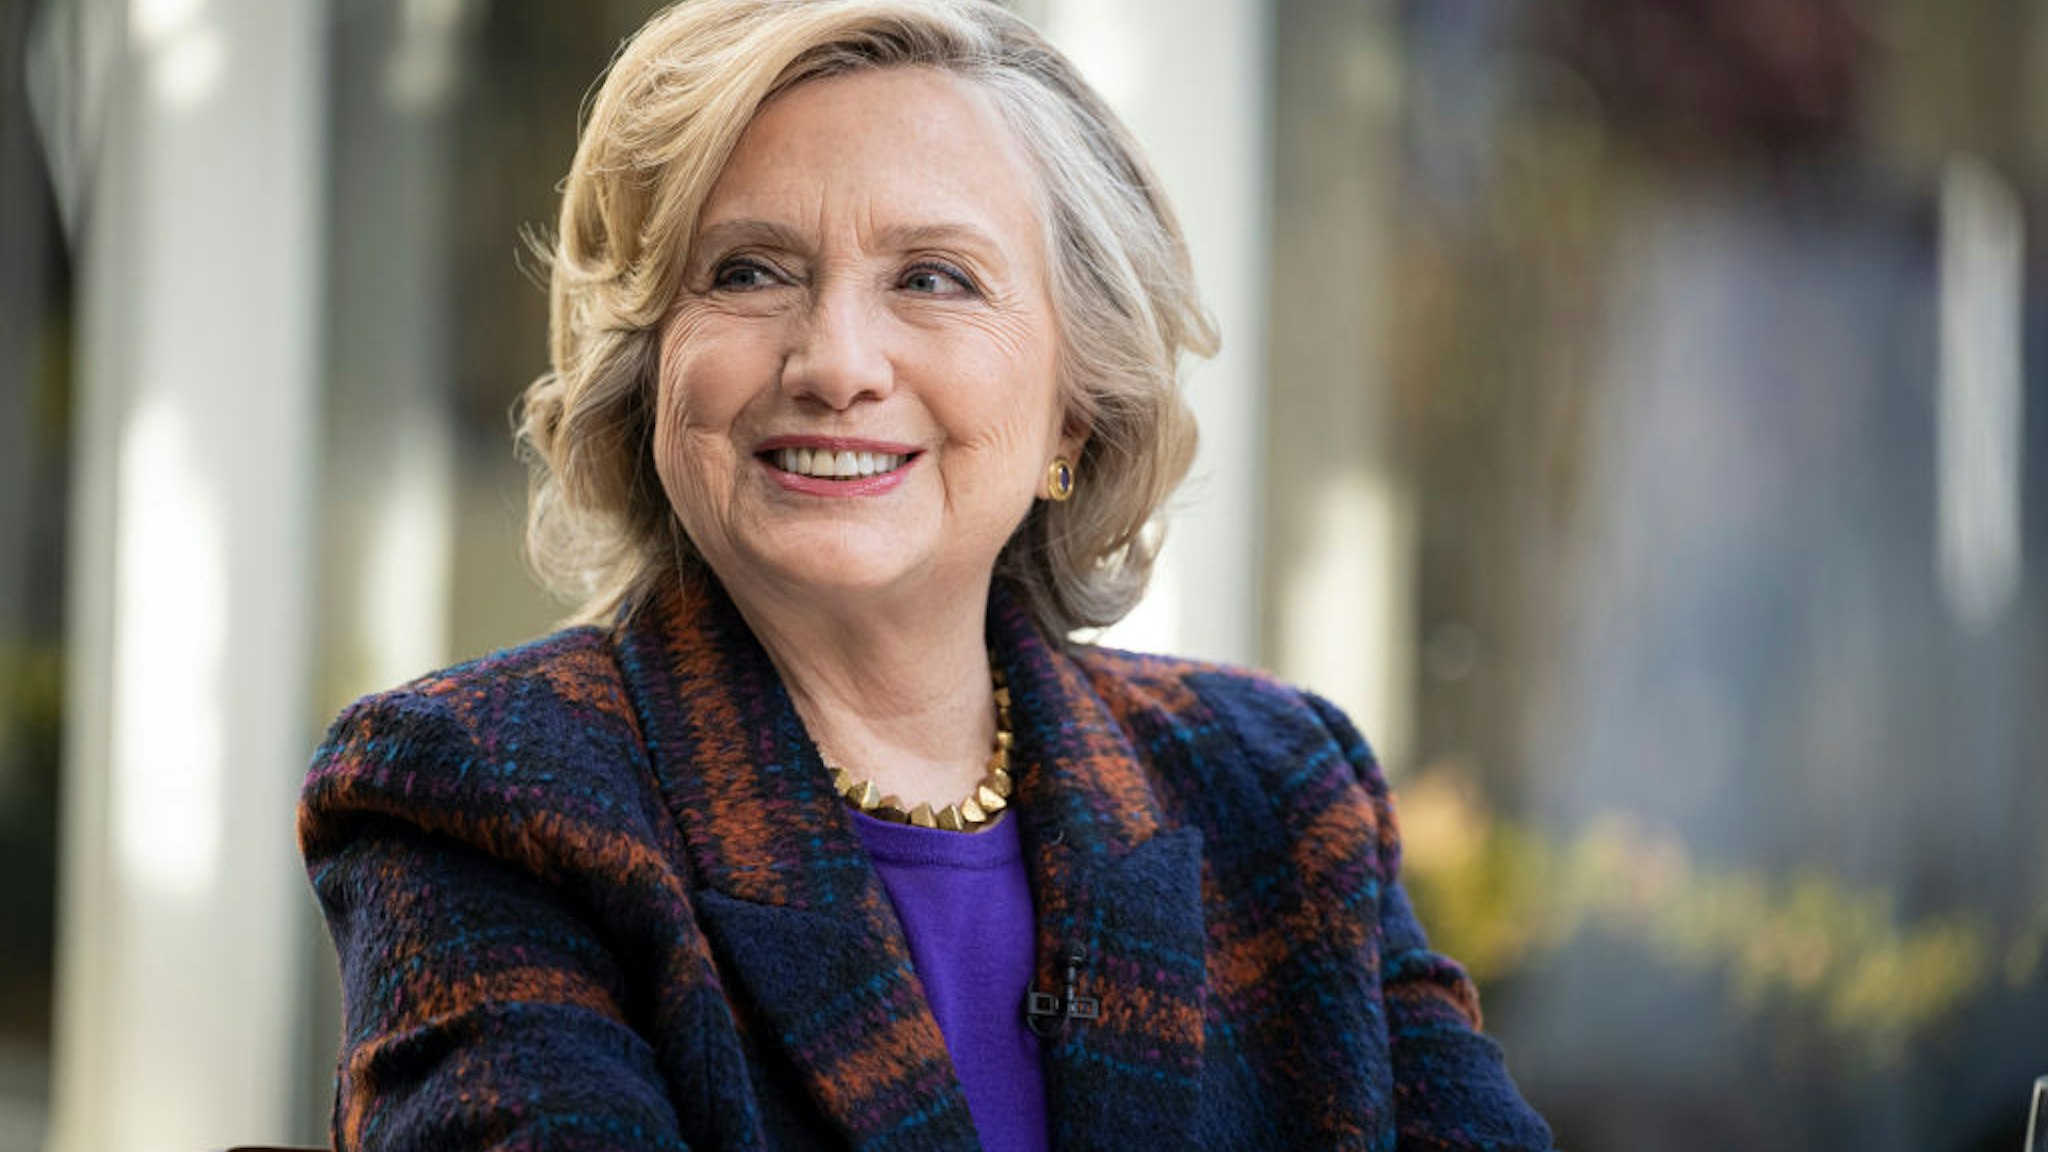 SUNDAY TODAY WITH WILLIE GEIST -- Pictured: Hillary Clinton on Dec. 12, 2021 -- (Photo by: Mike Smith/NBC/NBCU Photo Bank via Getty Images)